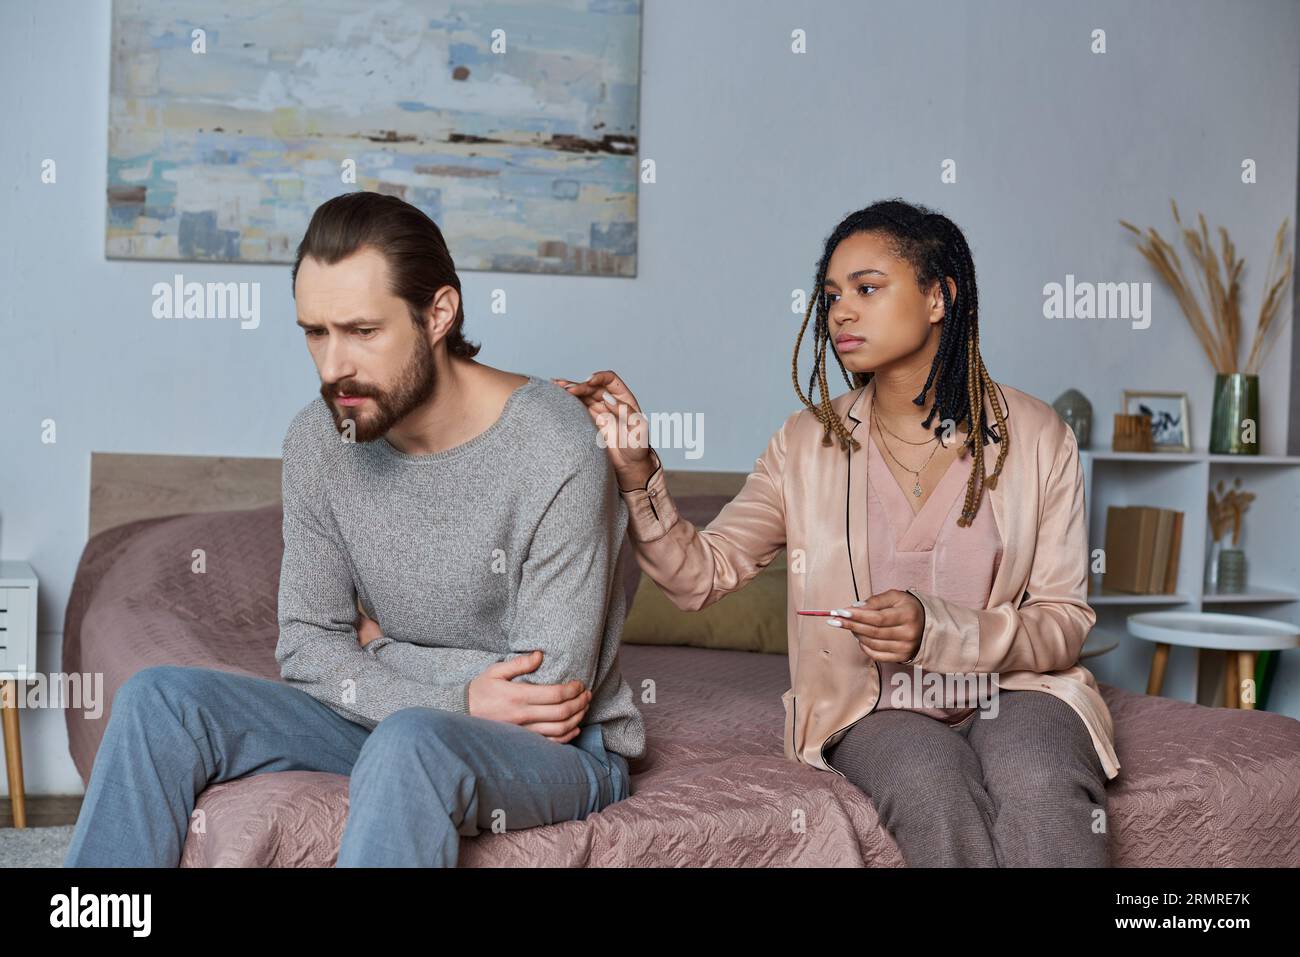 abortion concept, african american woman calming stressed man, bedroom, pregnancy test, unexpected Stock Photo